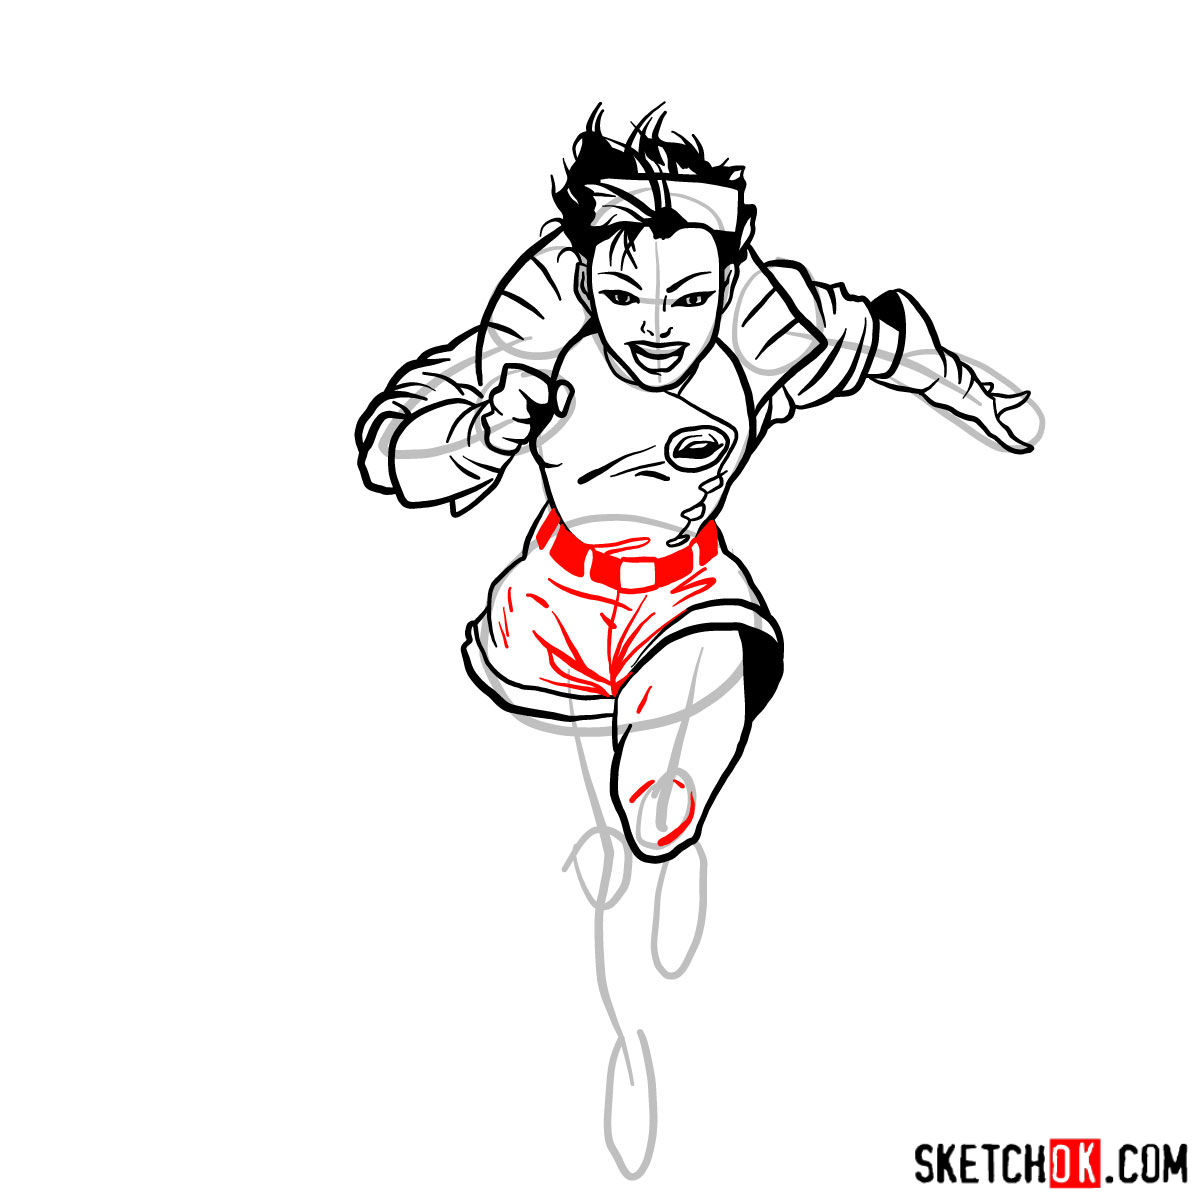 How to draw Jubilee mutant from X-Men series - step 11